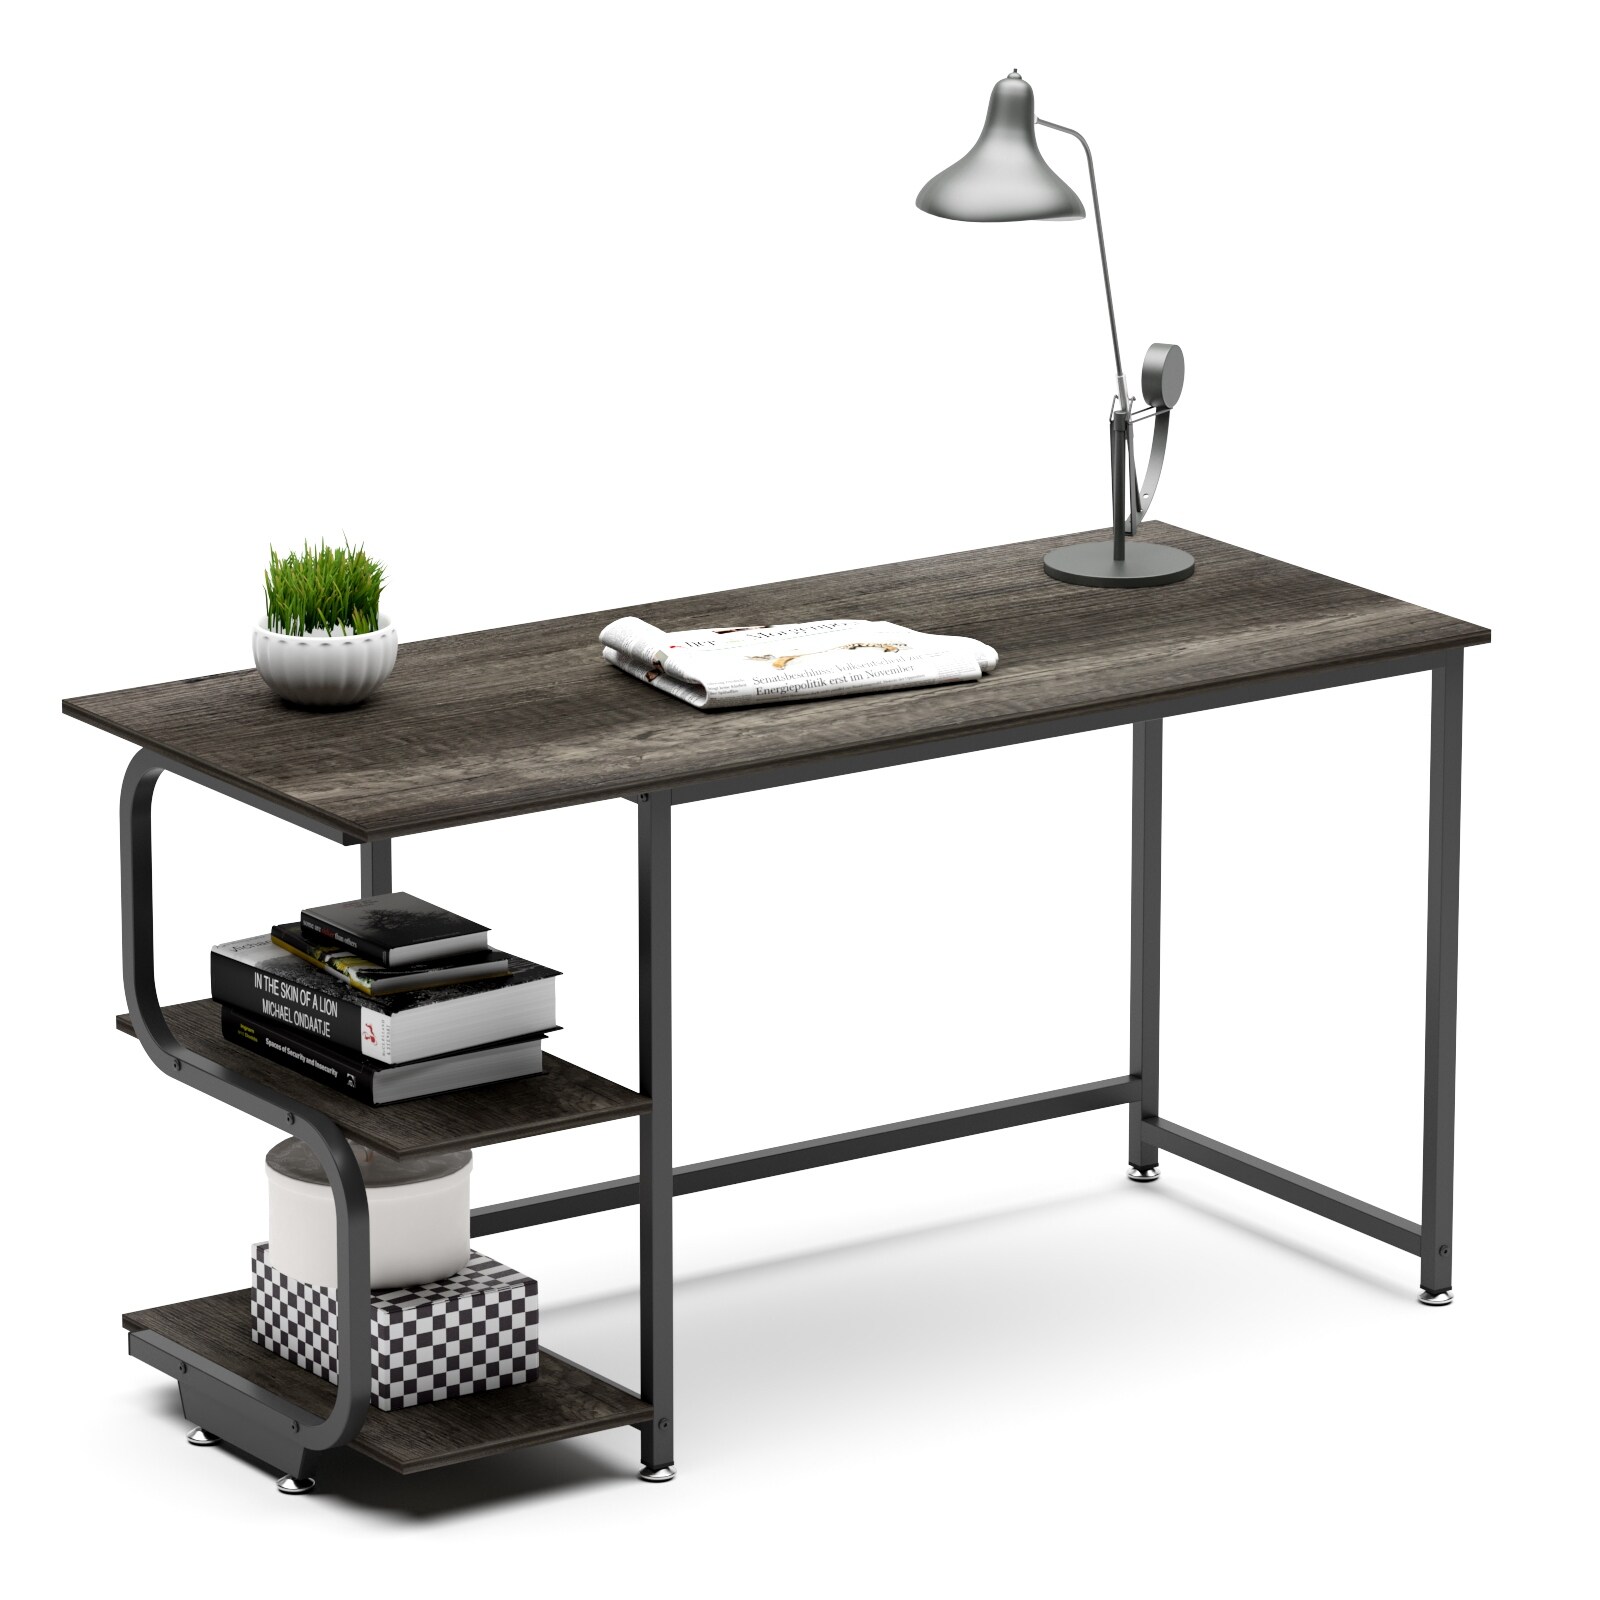 Teraves Reversible Computer Desk for Small Spaces with Shelves,47 inch Gaming Desk Office Desk for Home Office